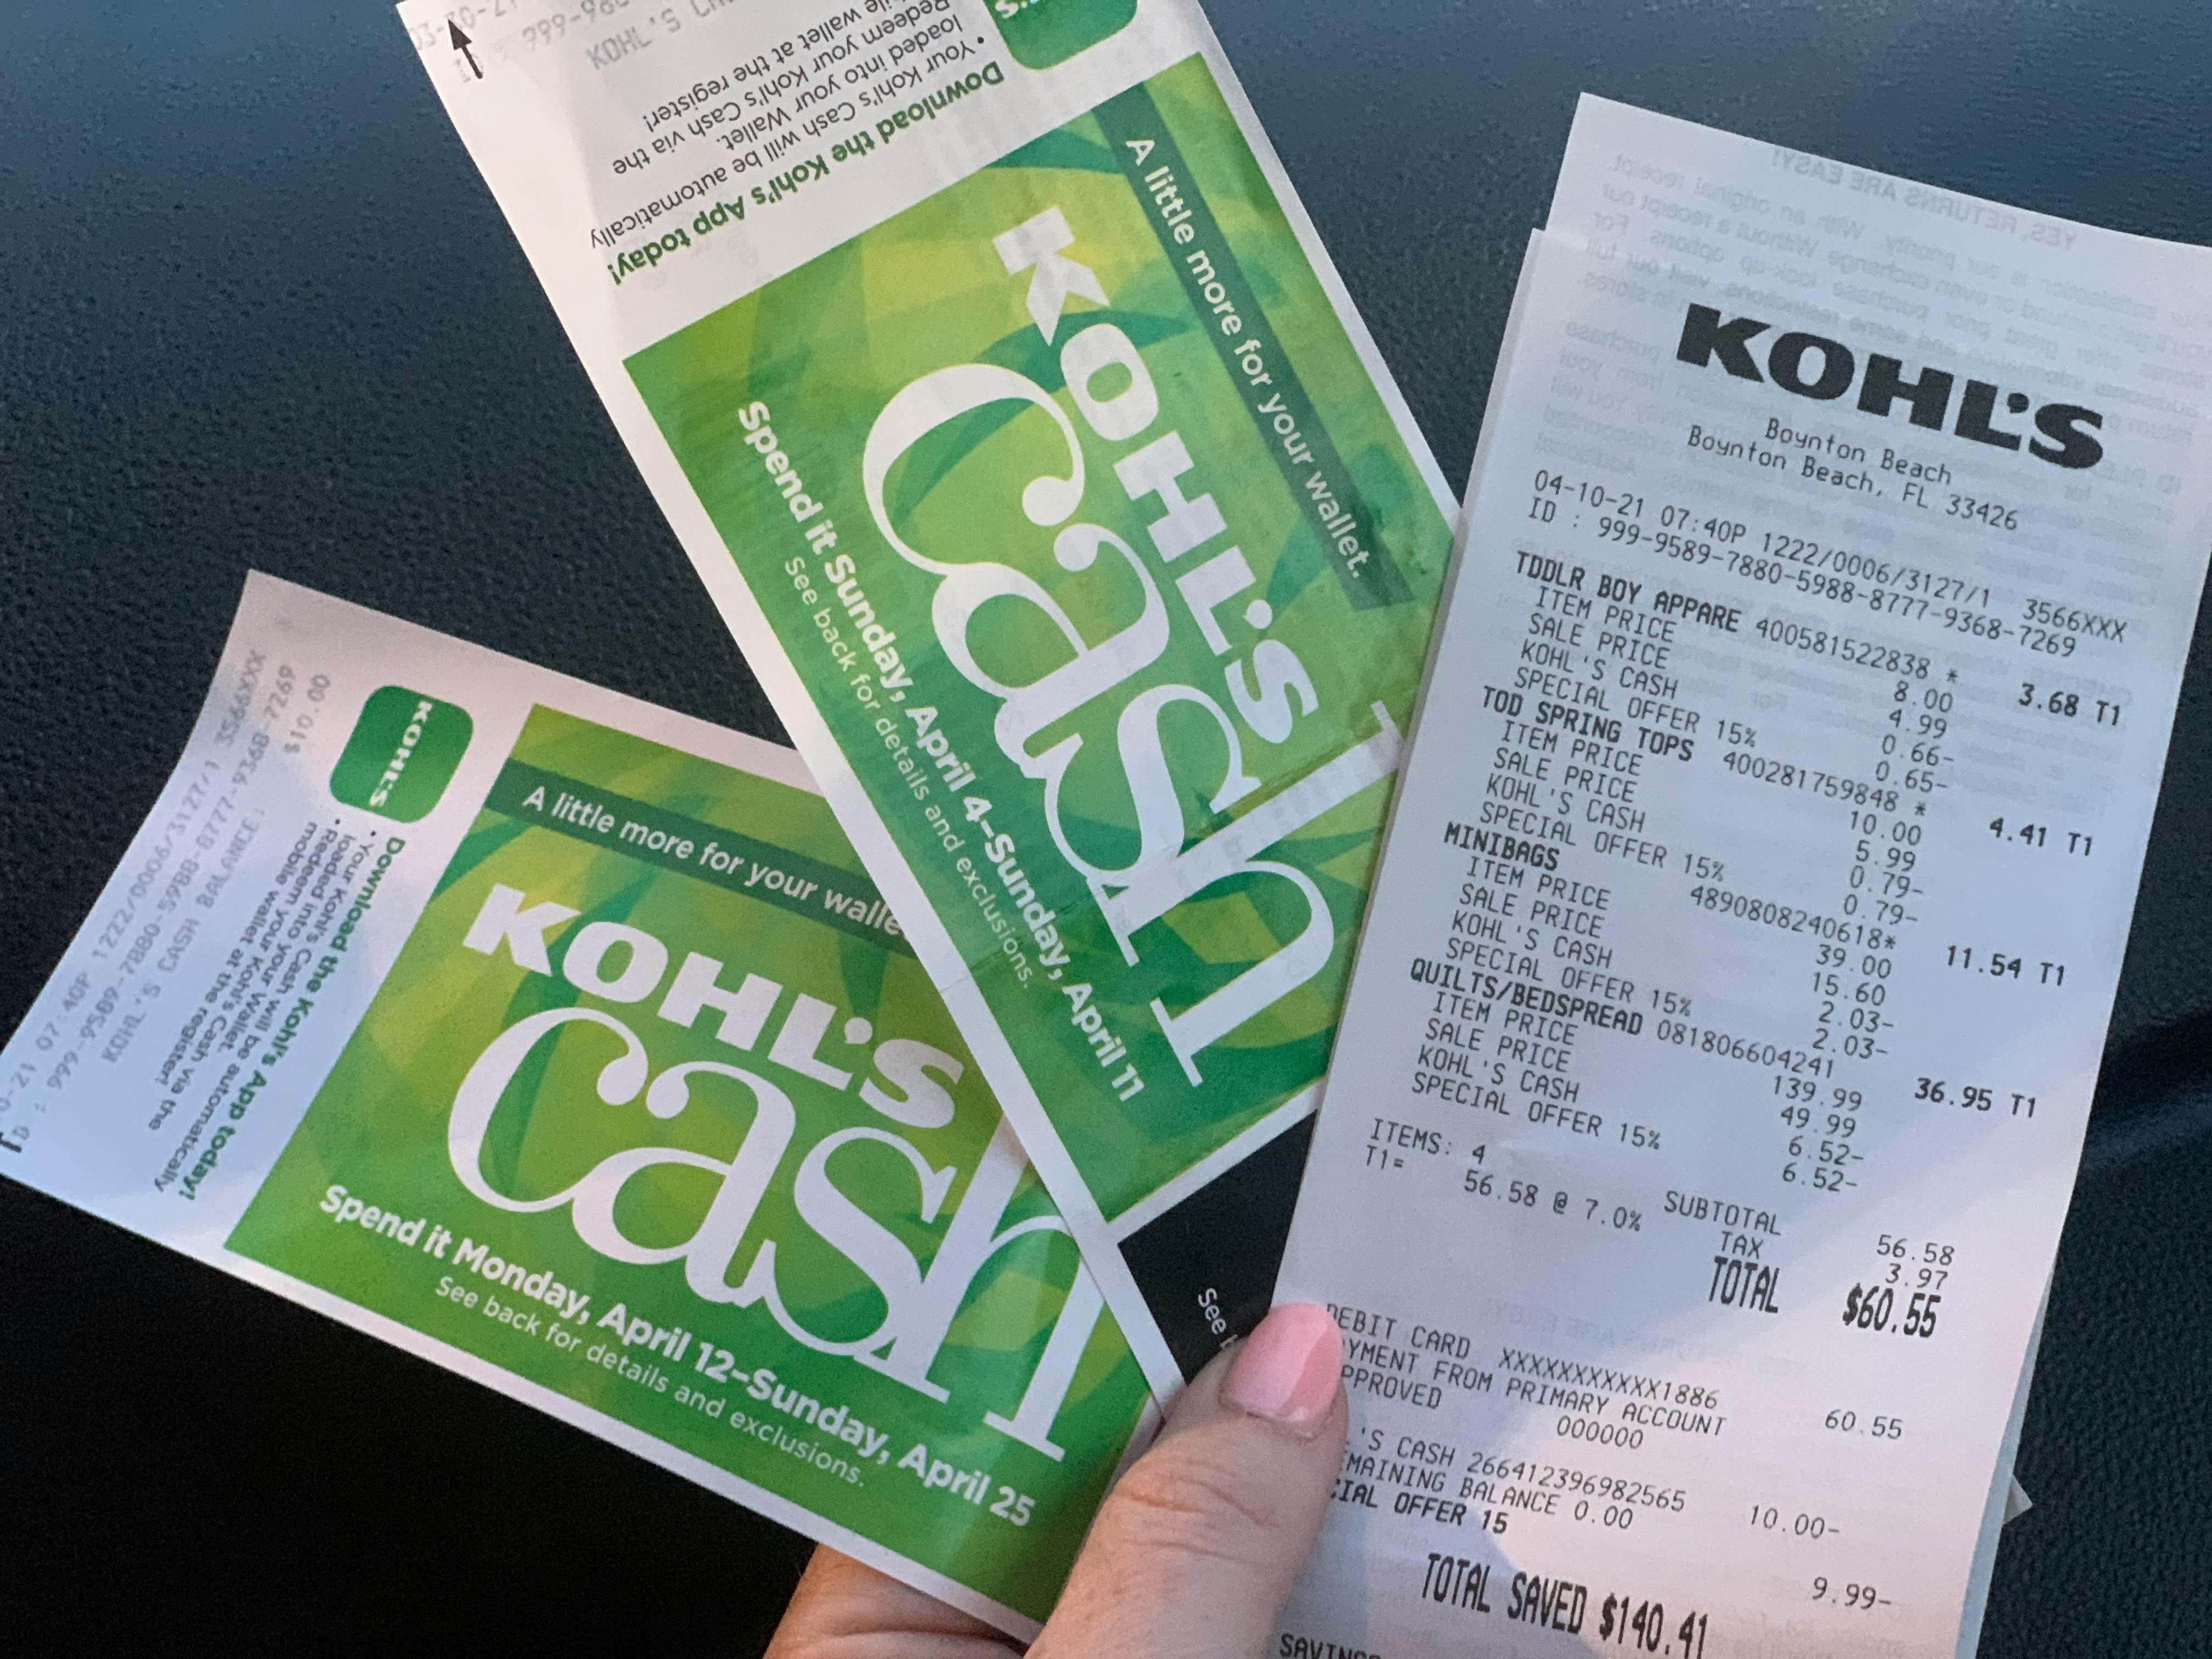 Existing Discover Cardholders: Free $10 Kohl's Cash — My Money Blog